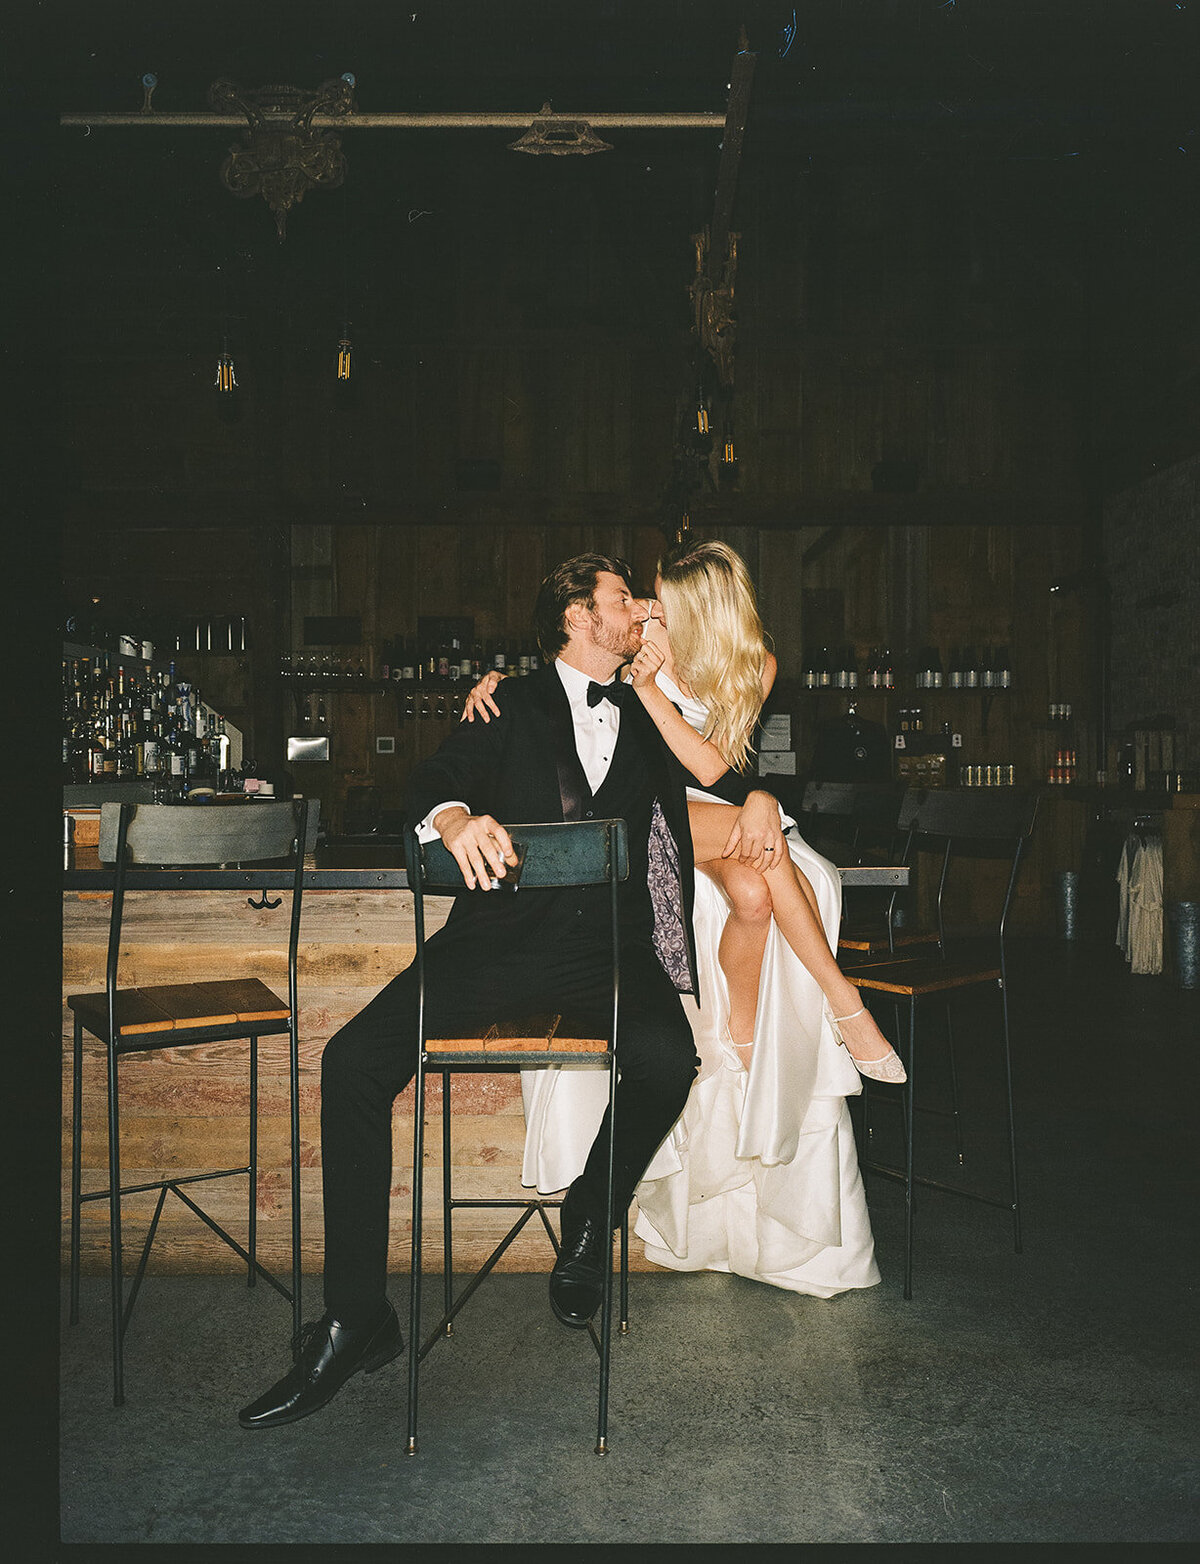 A couple dressed elegantly, a man in a tuxedo and a woman in a long dress, sharing a kiss while sitting at a bar in a dimly-lit rustic room during their Park